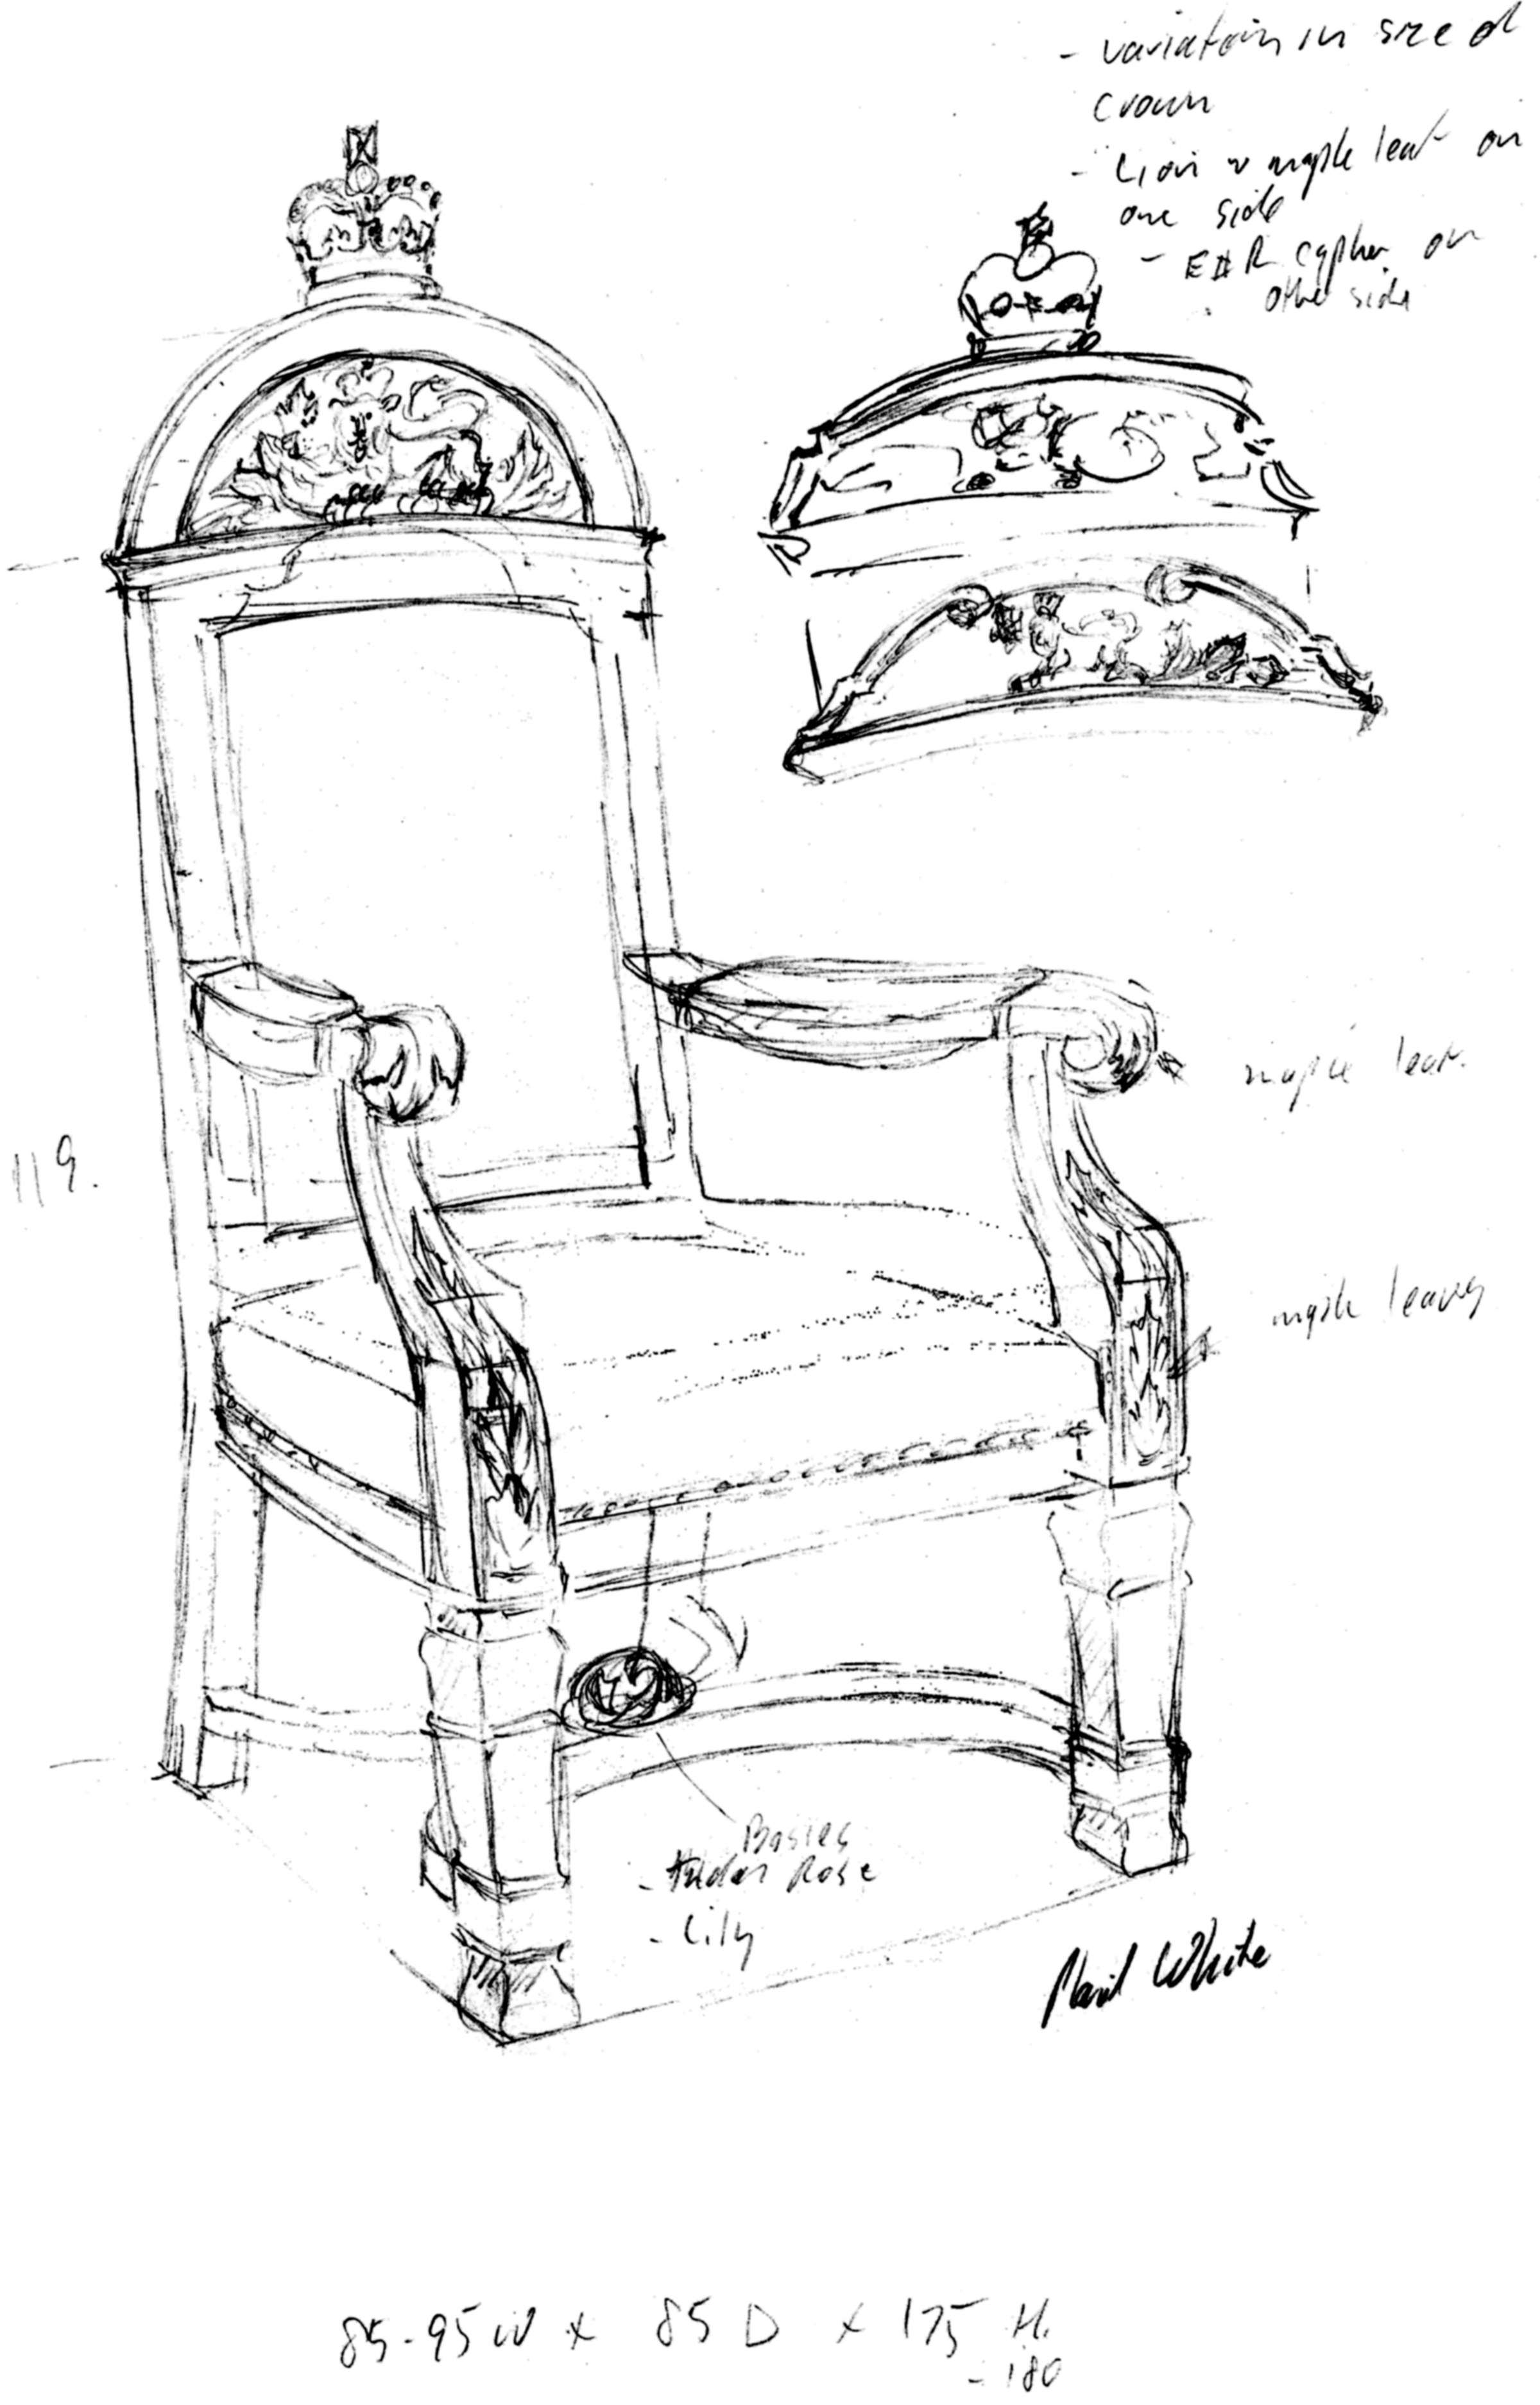 One of Dominion Sculptor Phil White’s concept sketches for the thrones shows how Beaux Arts details were incorporated to harmonize the design with the early 20th-century architecture of the Senate of Canada Building.